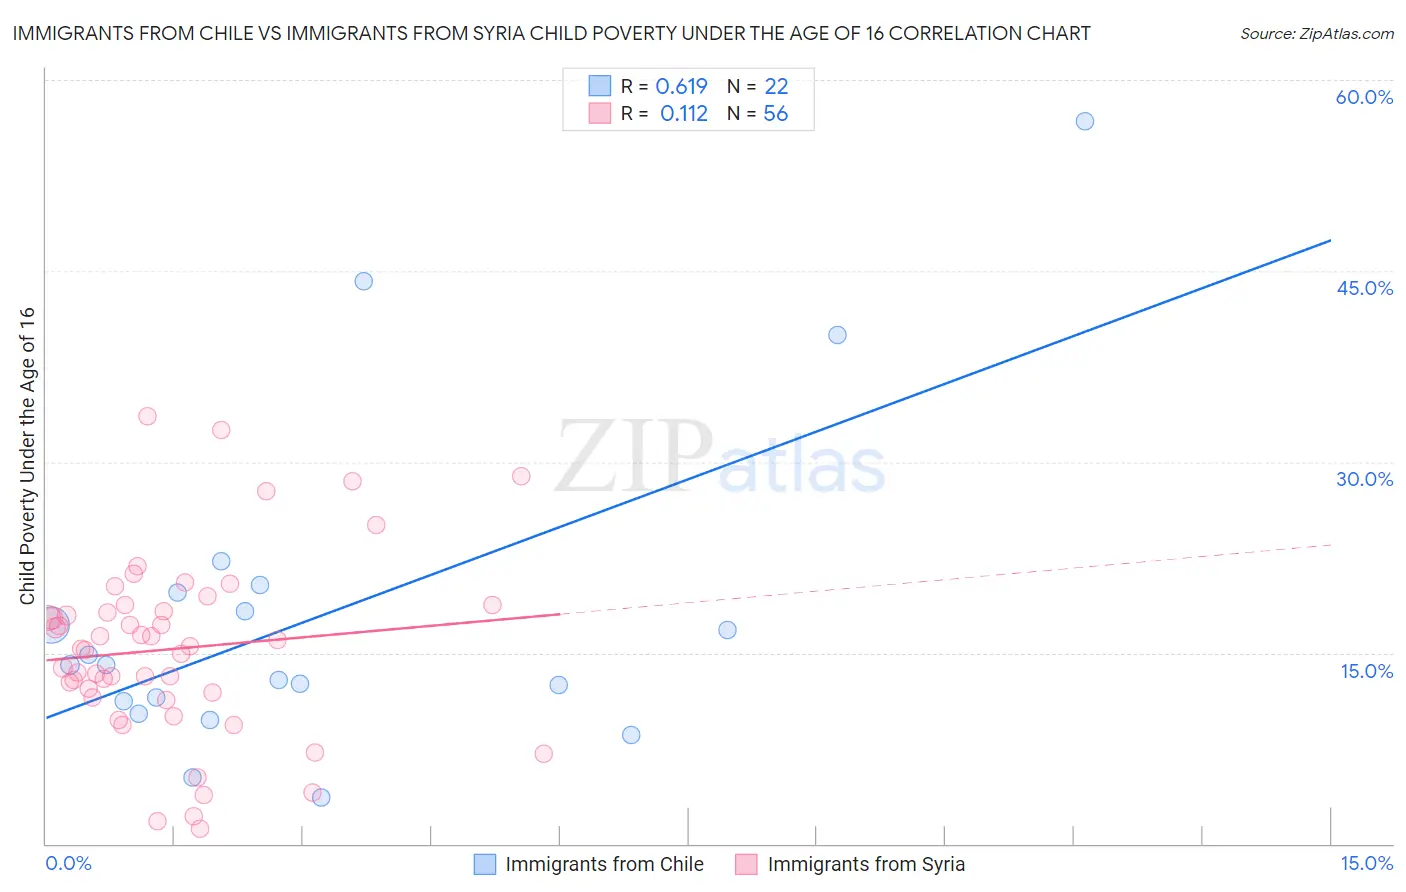 Immigrants from Chile vs Immigrants from Syria Child Poverty Under the Age of 16